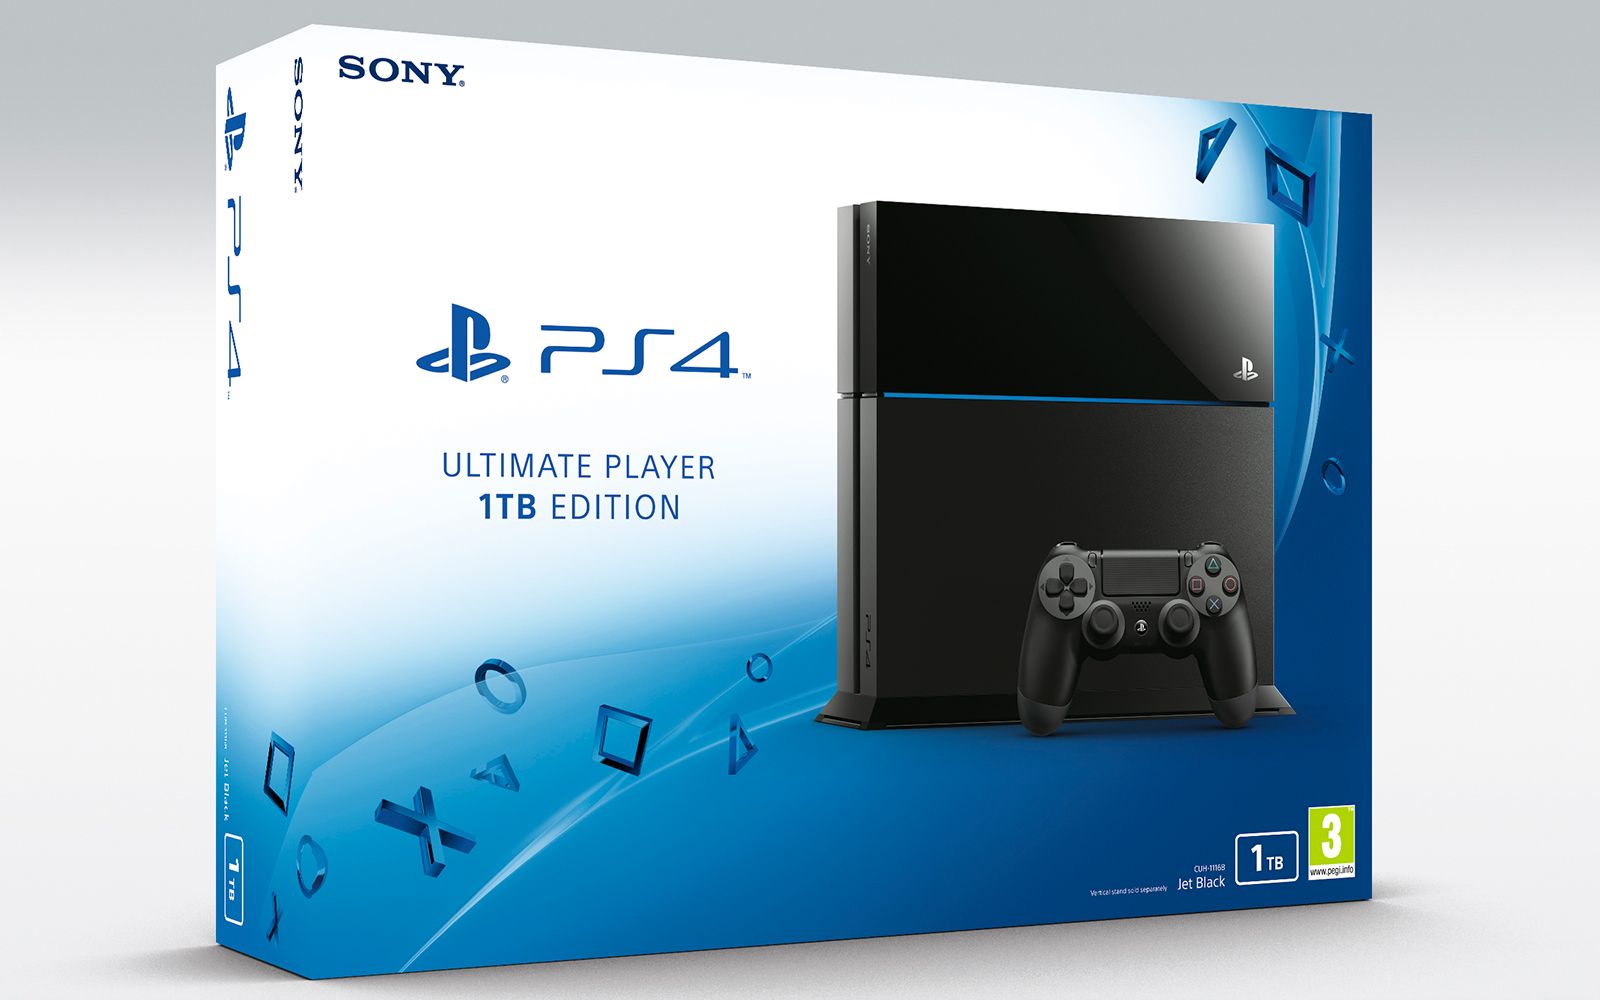 new sony 1tb ps4 ultimate player edition unveiled for release soon image 1